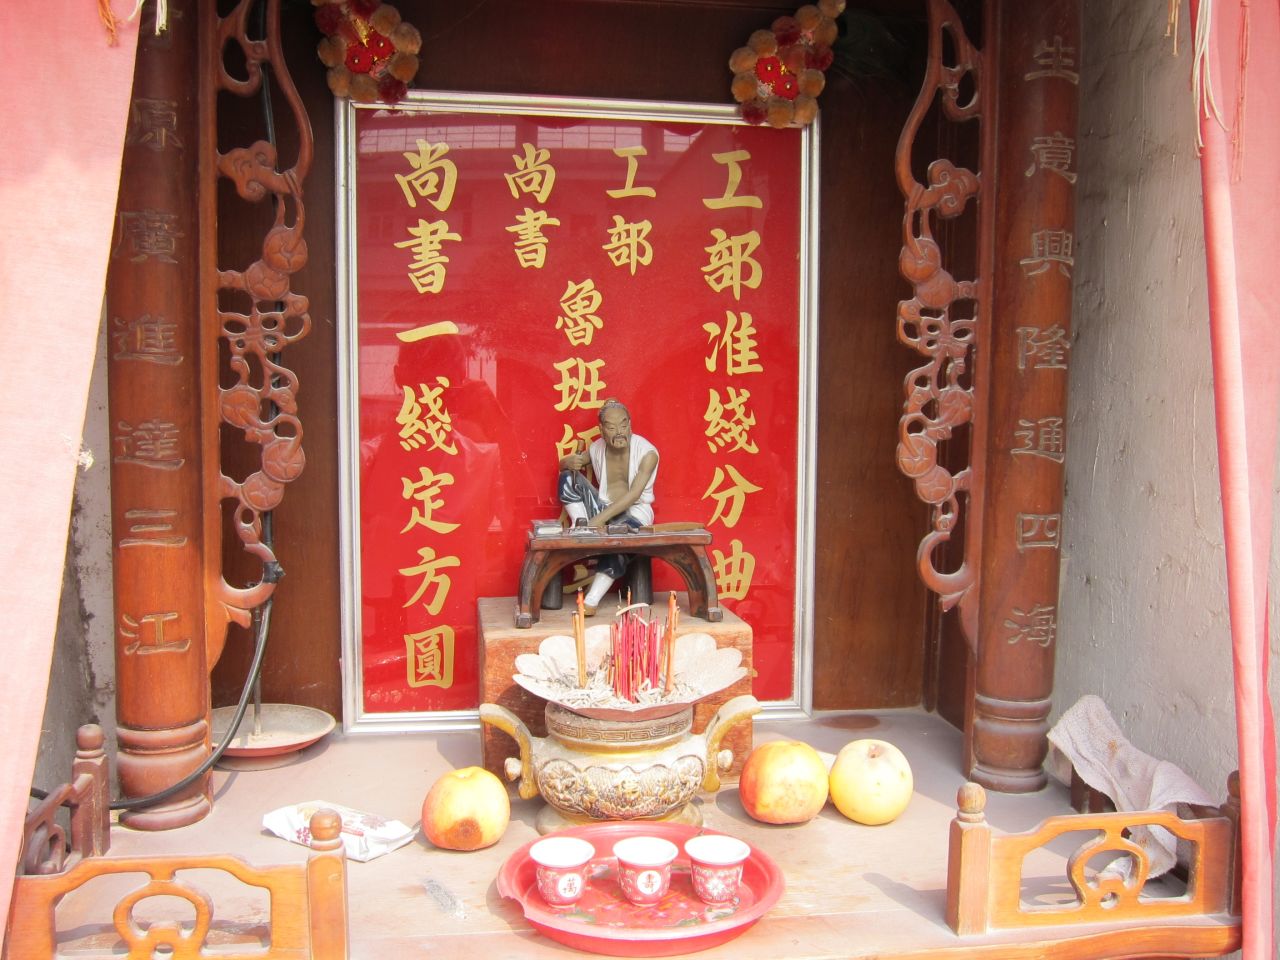 A shrine dedicated to Lu Ban, the "patron saint" for Chinese builders and construction workers, stands at the heart of the shipyard